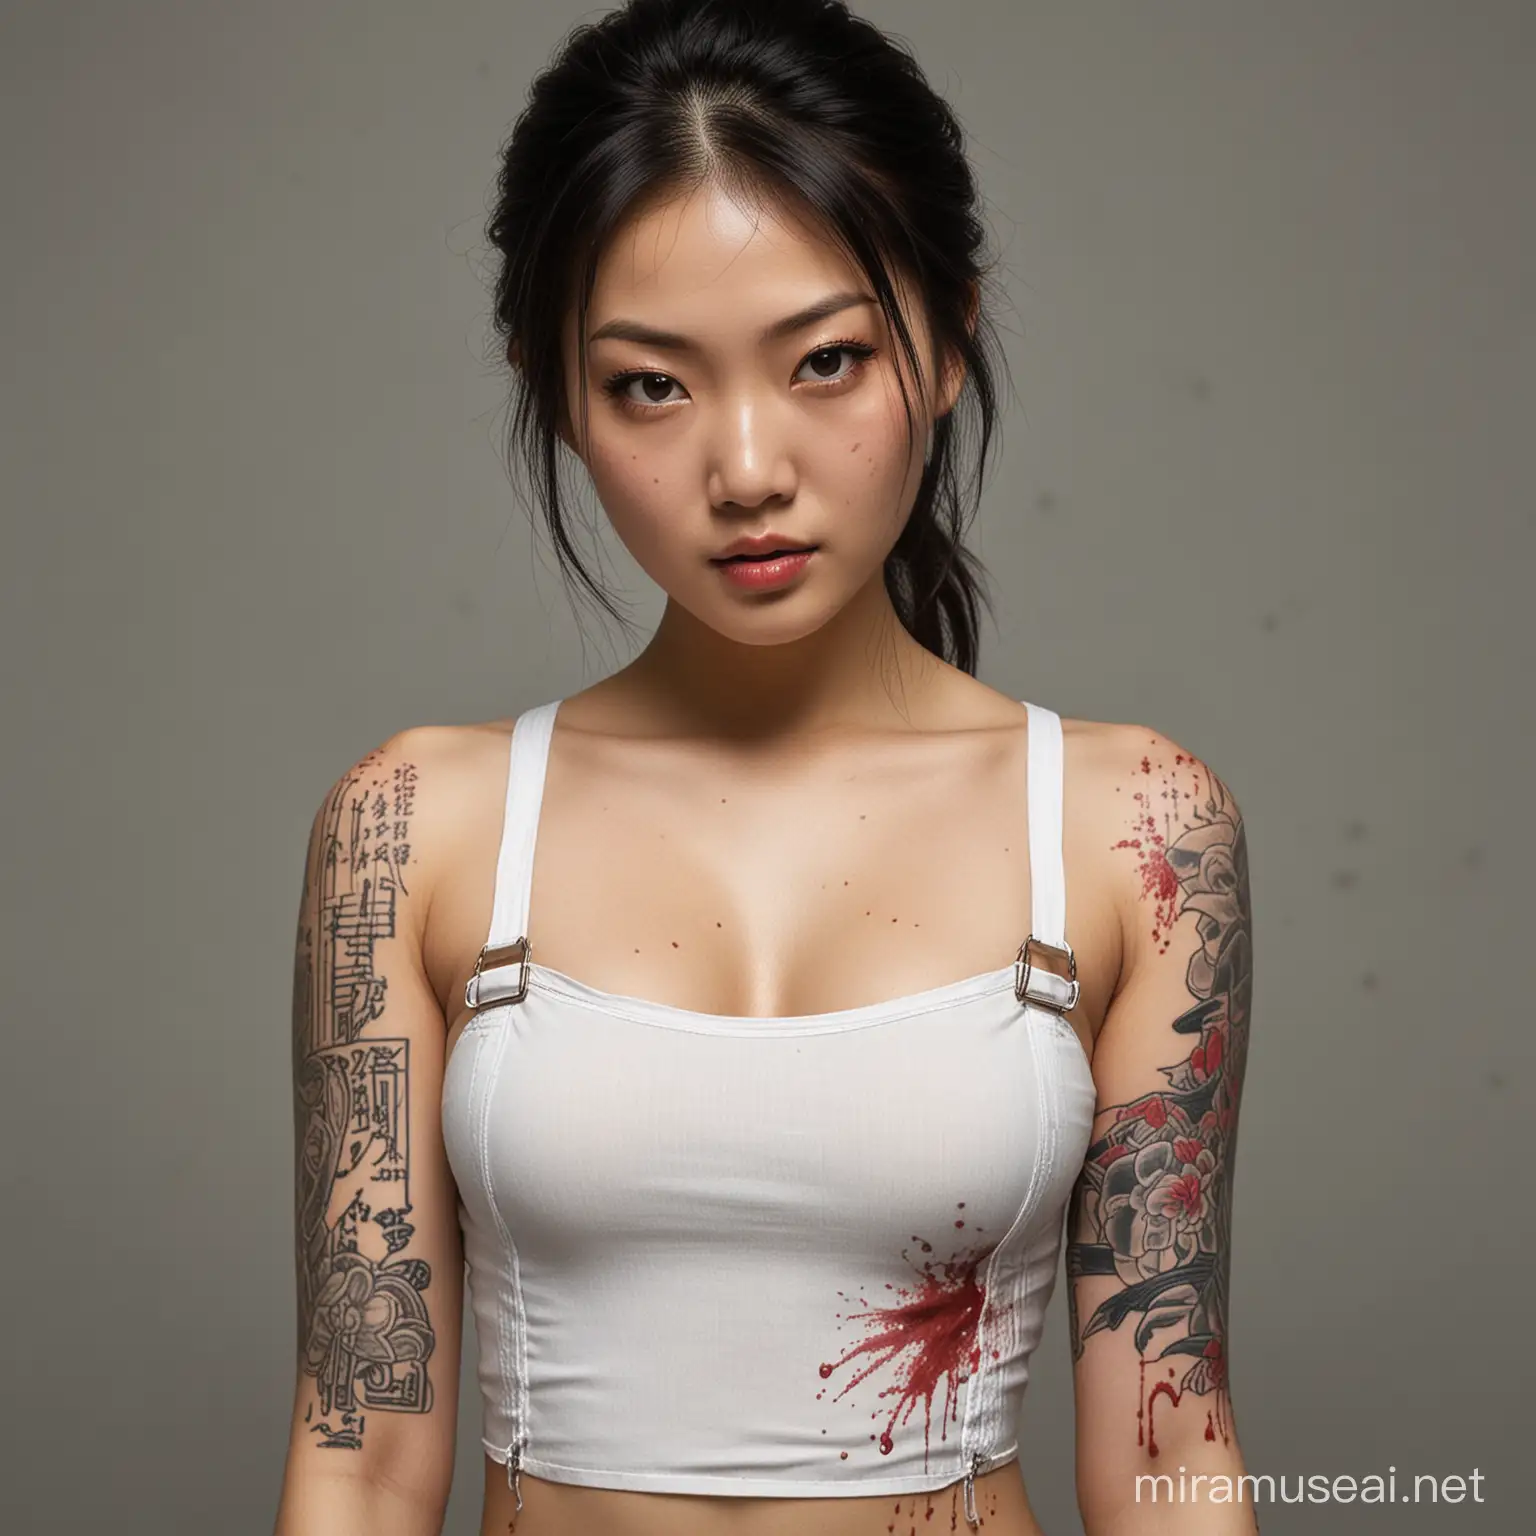 Asian Girl in Yakuza Style with White Suspenders and Japanese Symbolism Tattoos